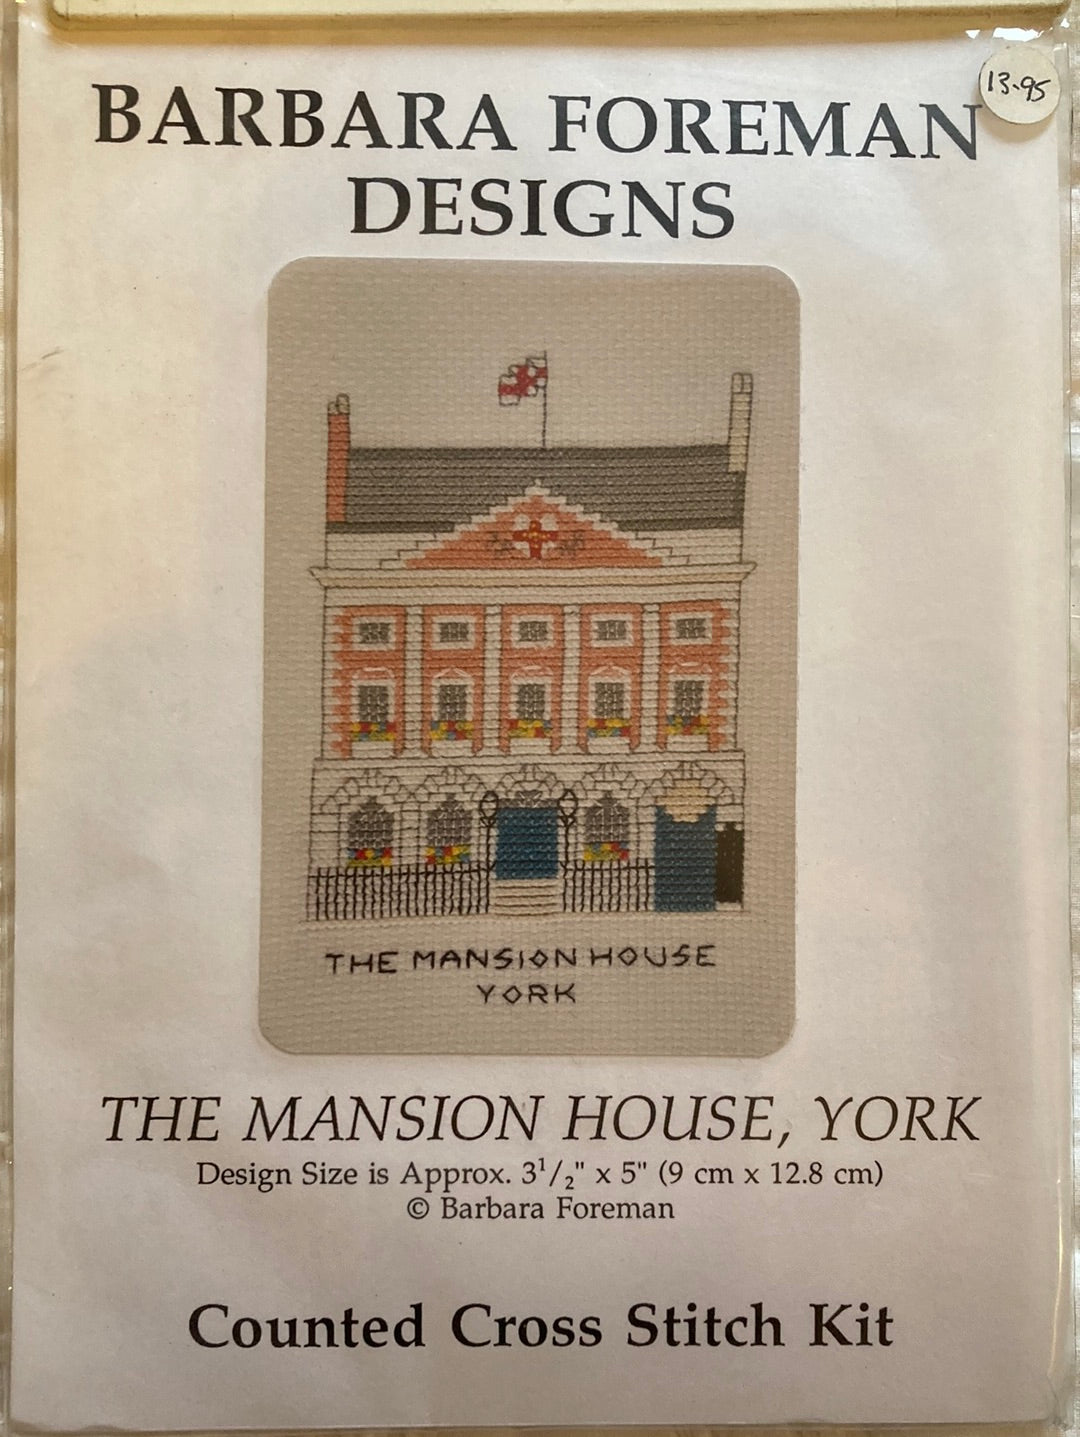 The Mansion House, York by Barbara Foreman Designs